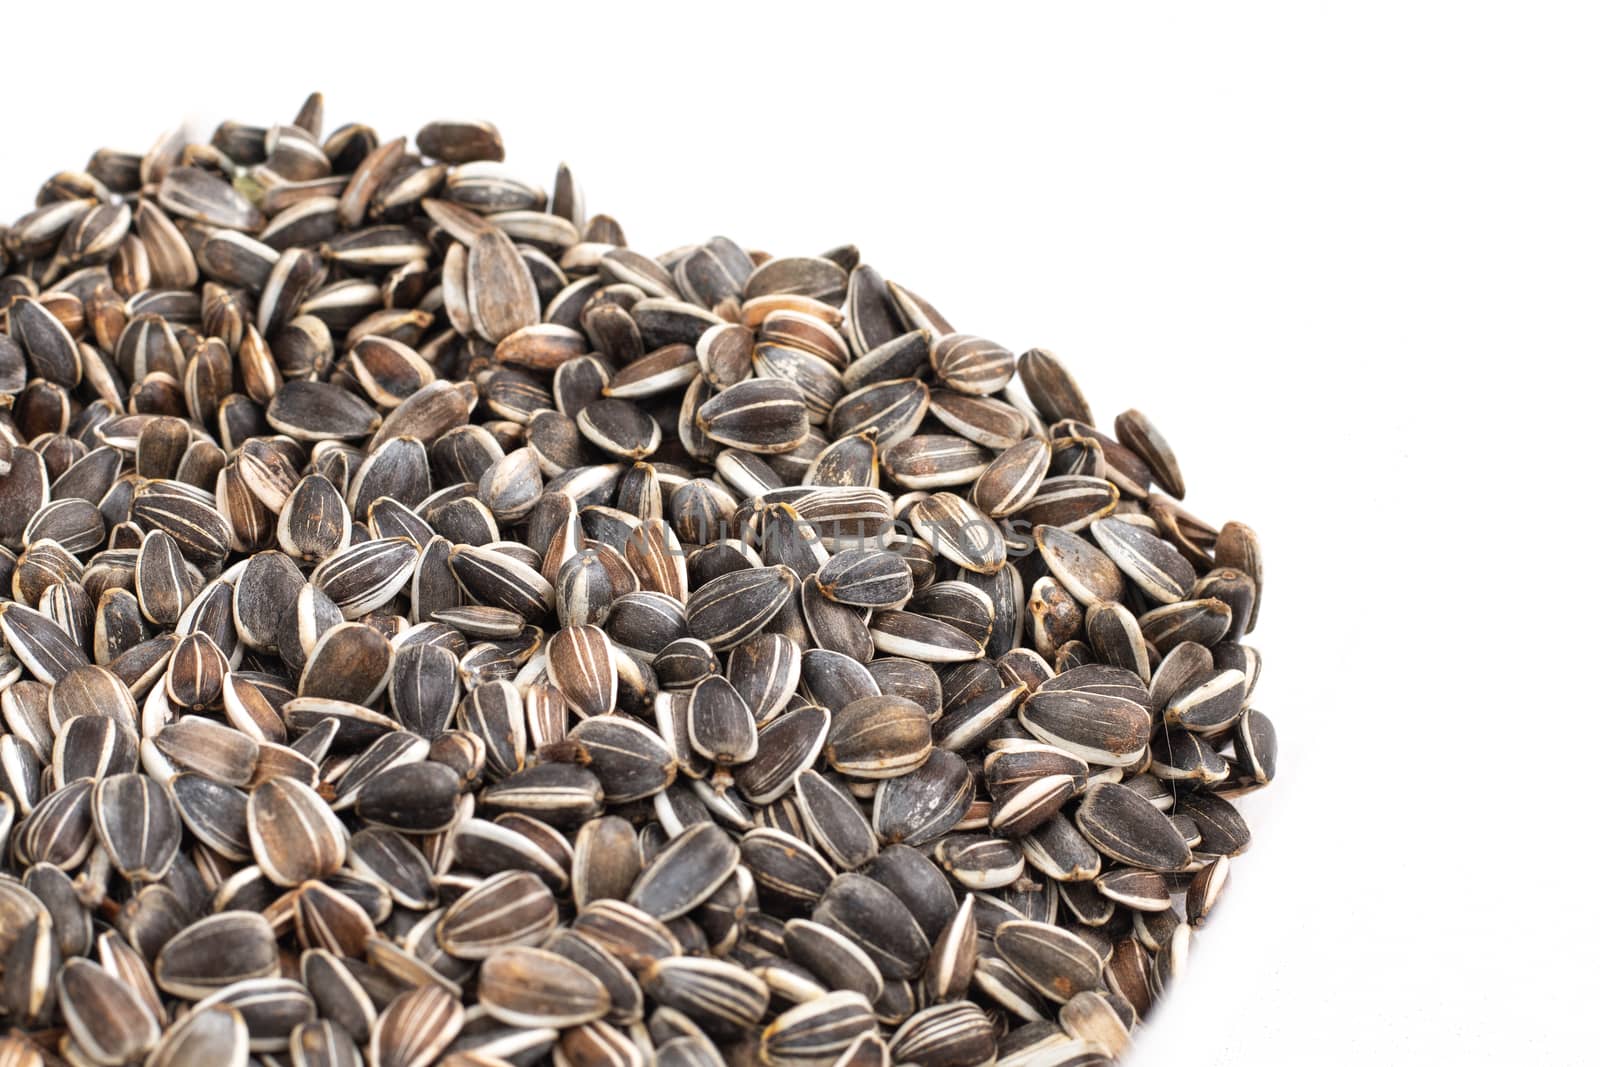 sunflower seed in heap on white background in studio